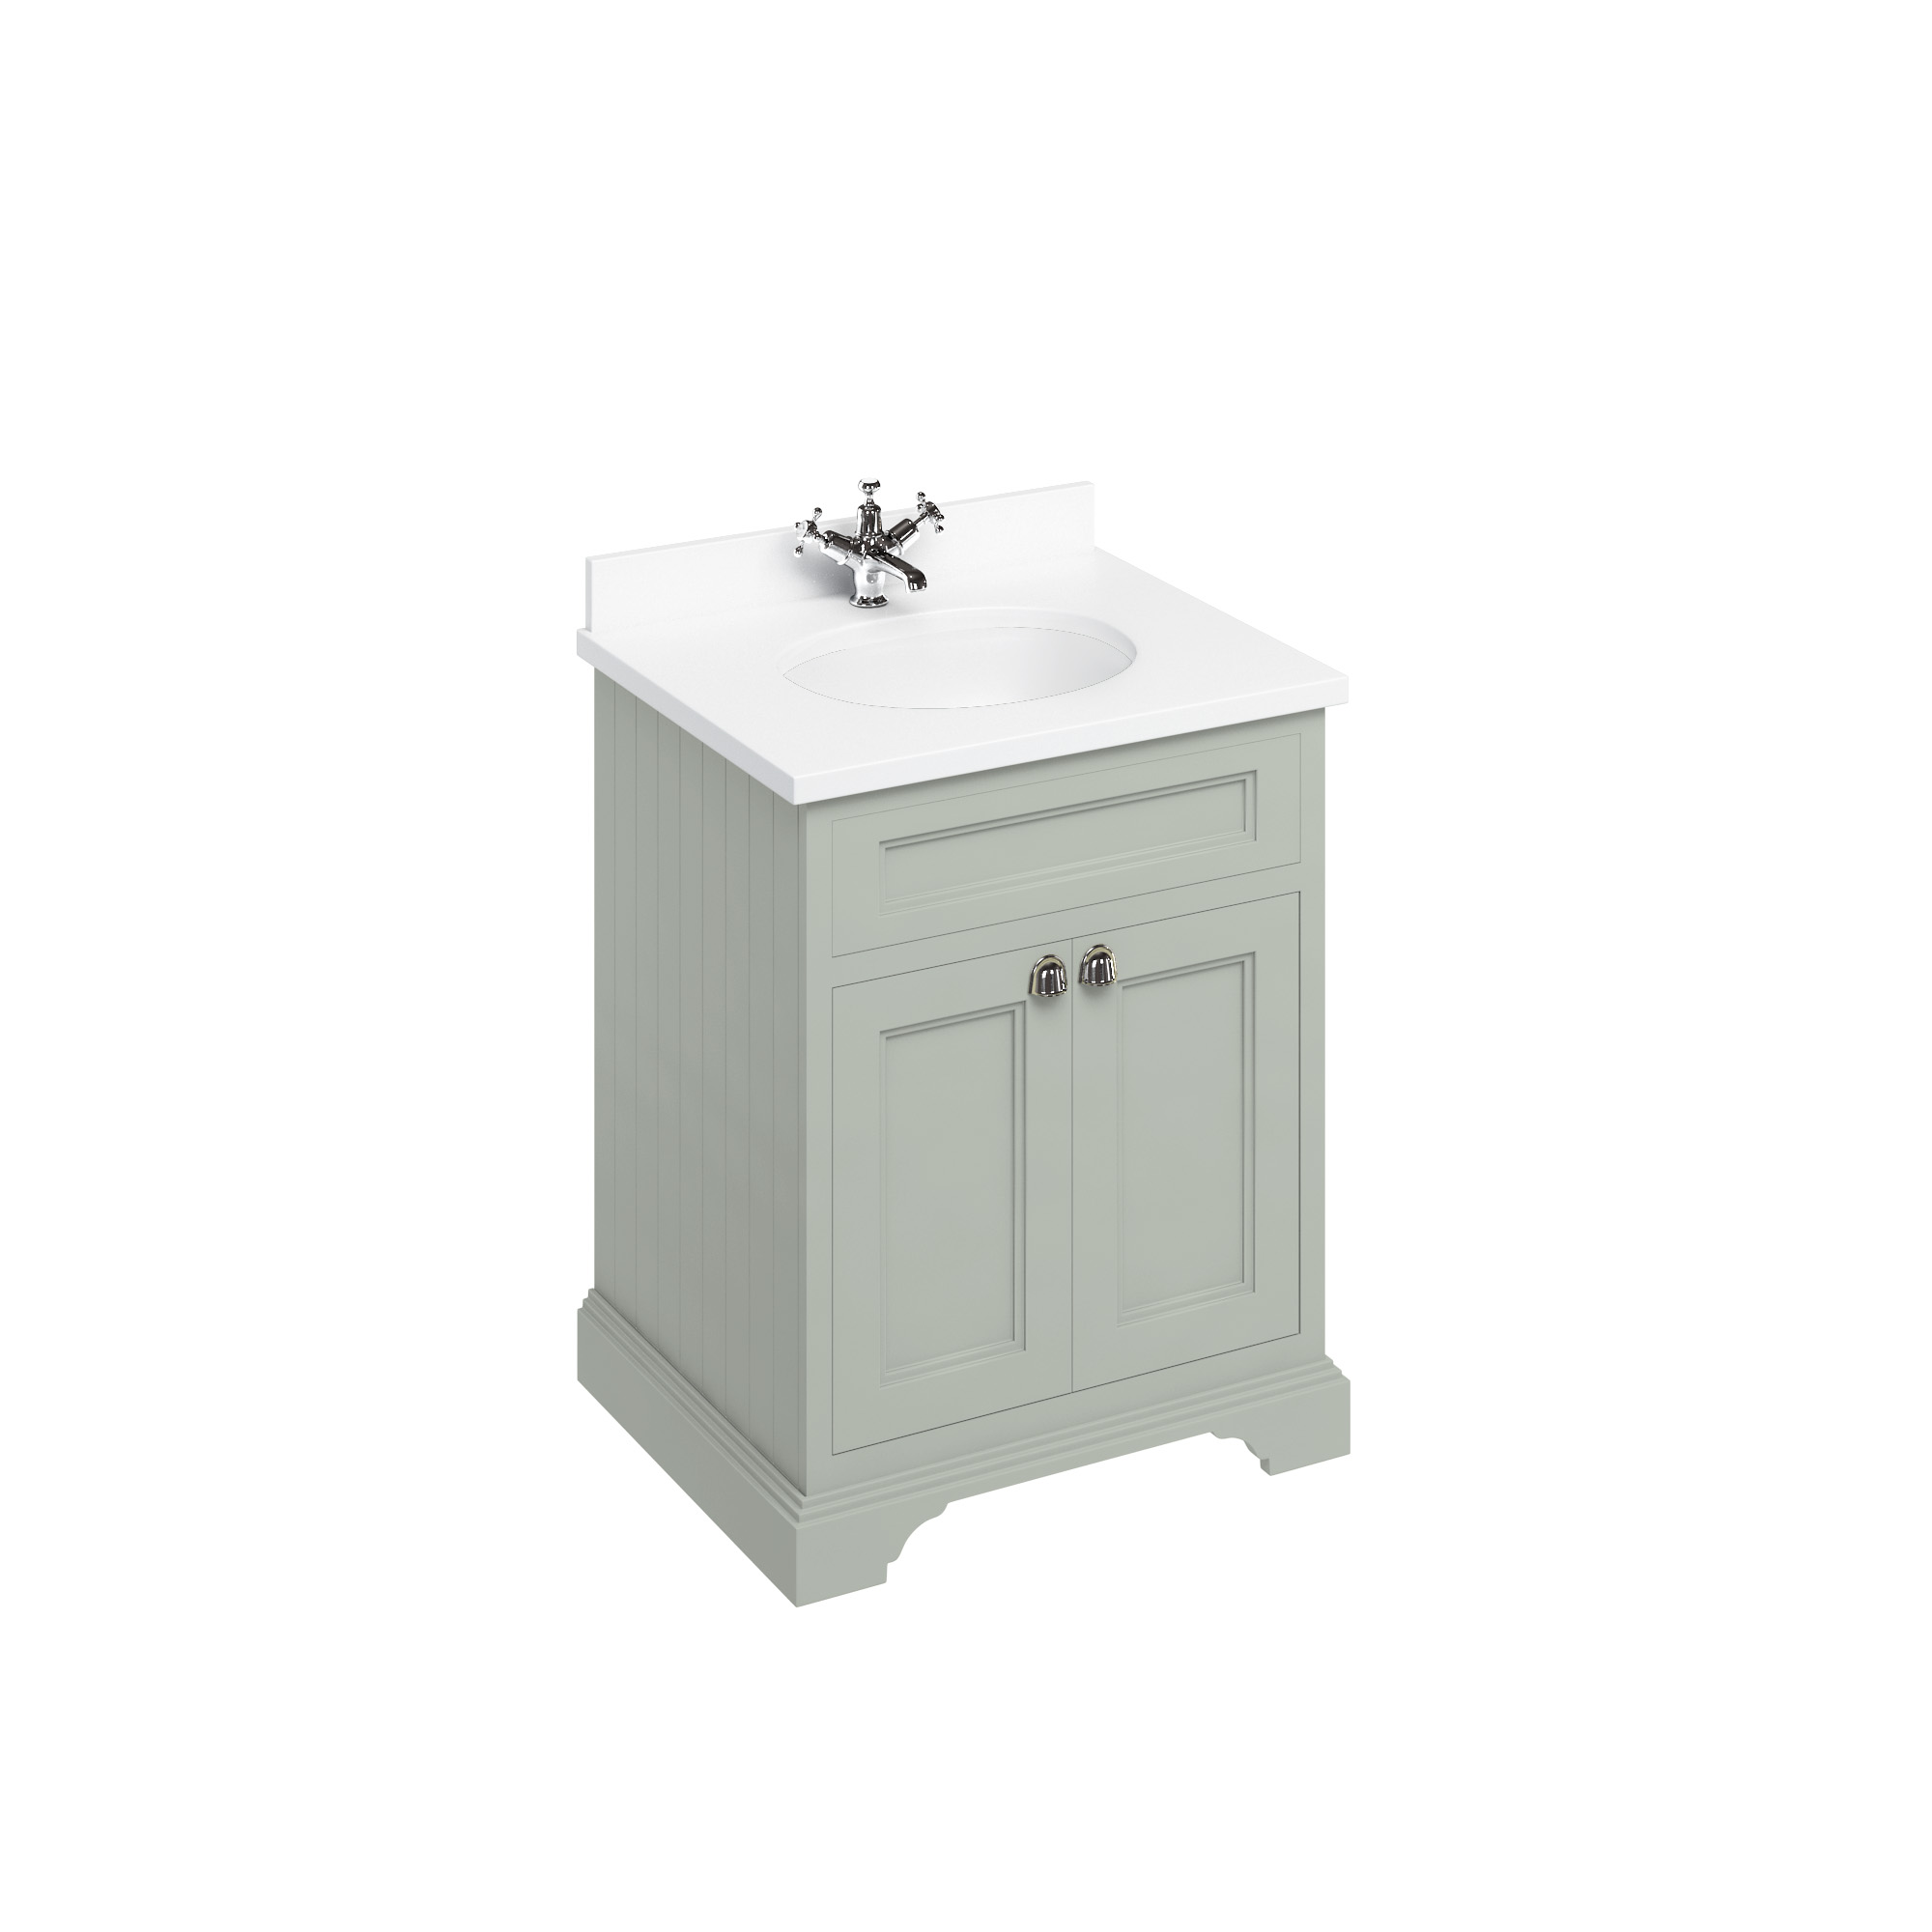 Freestanding 65 Vanity Unit with doors - Dark Olive and Minerva white worktop with integrated white basin